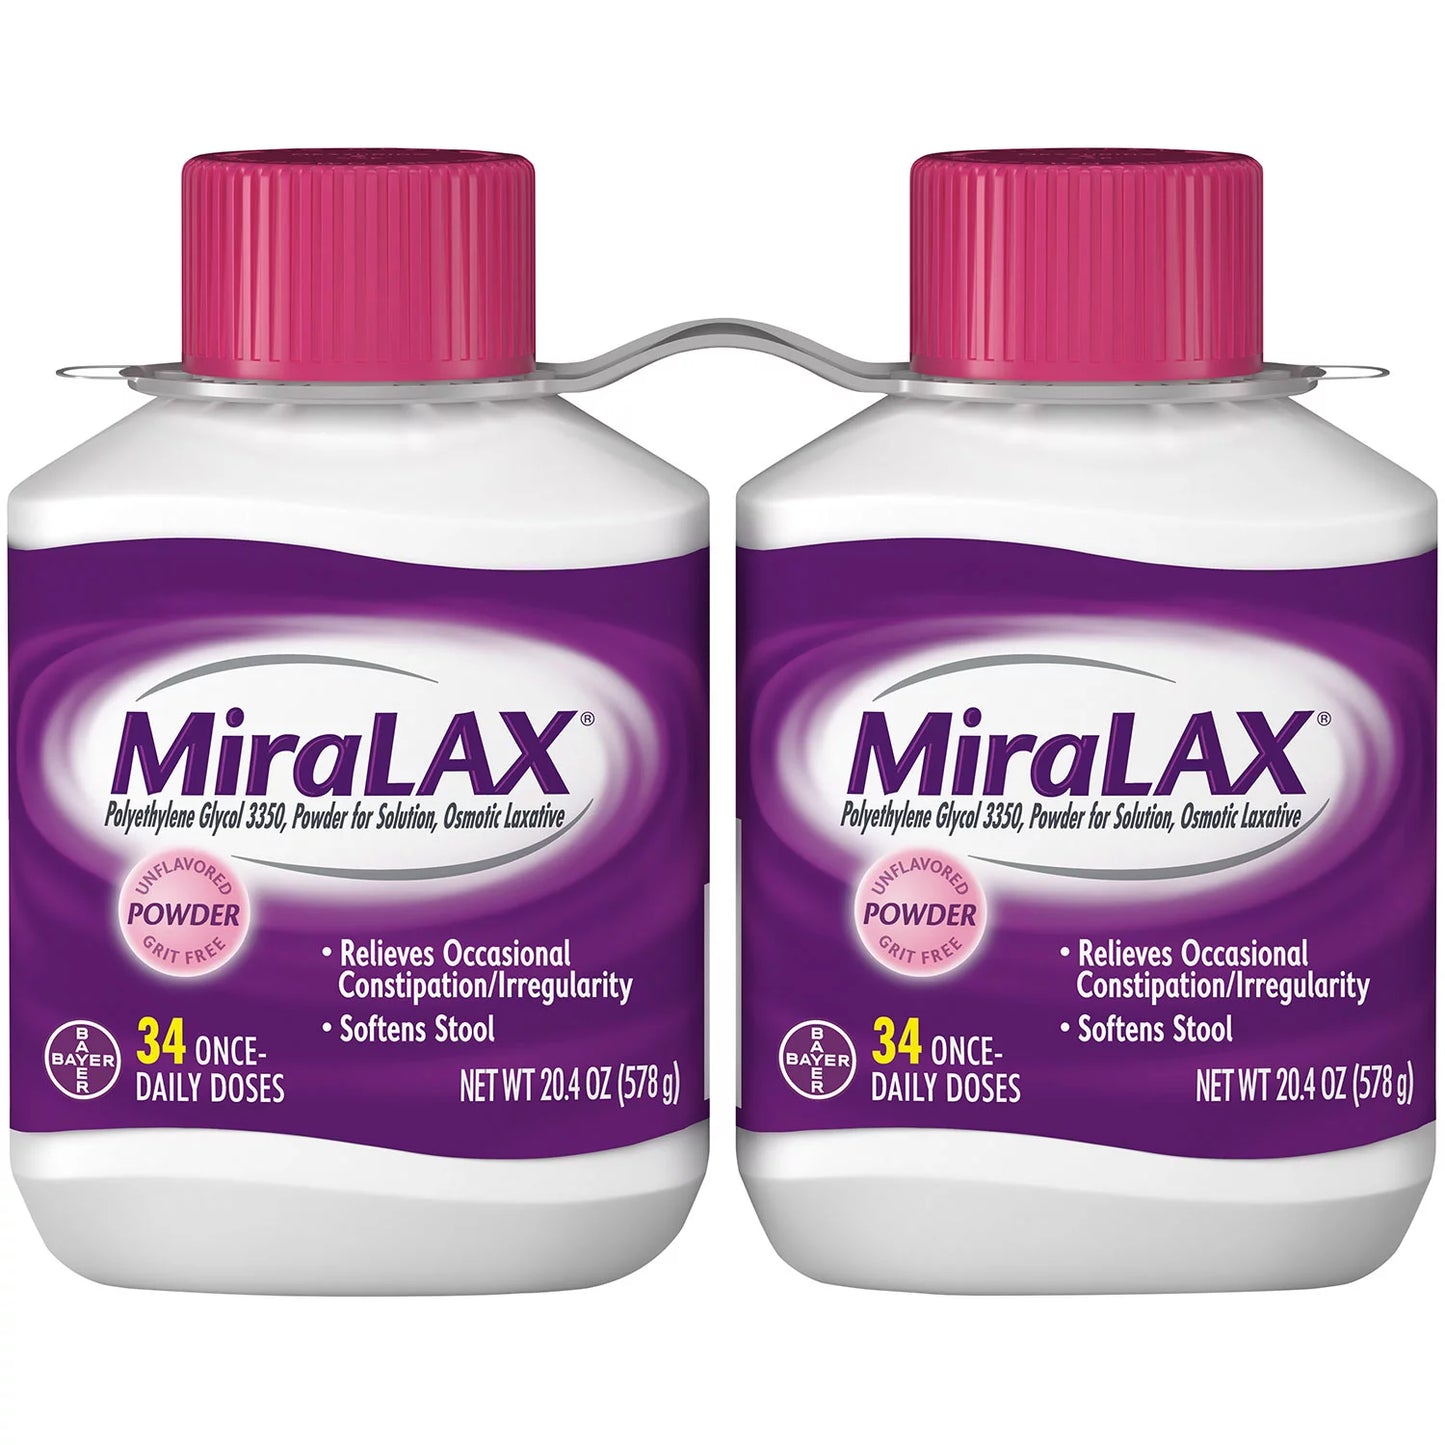 MiraLAX Laxative Powder for Gentle Constipation Relief (34 doses, 2 ct.)